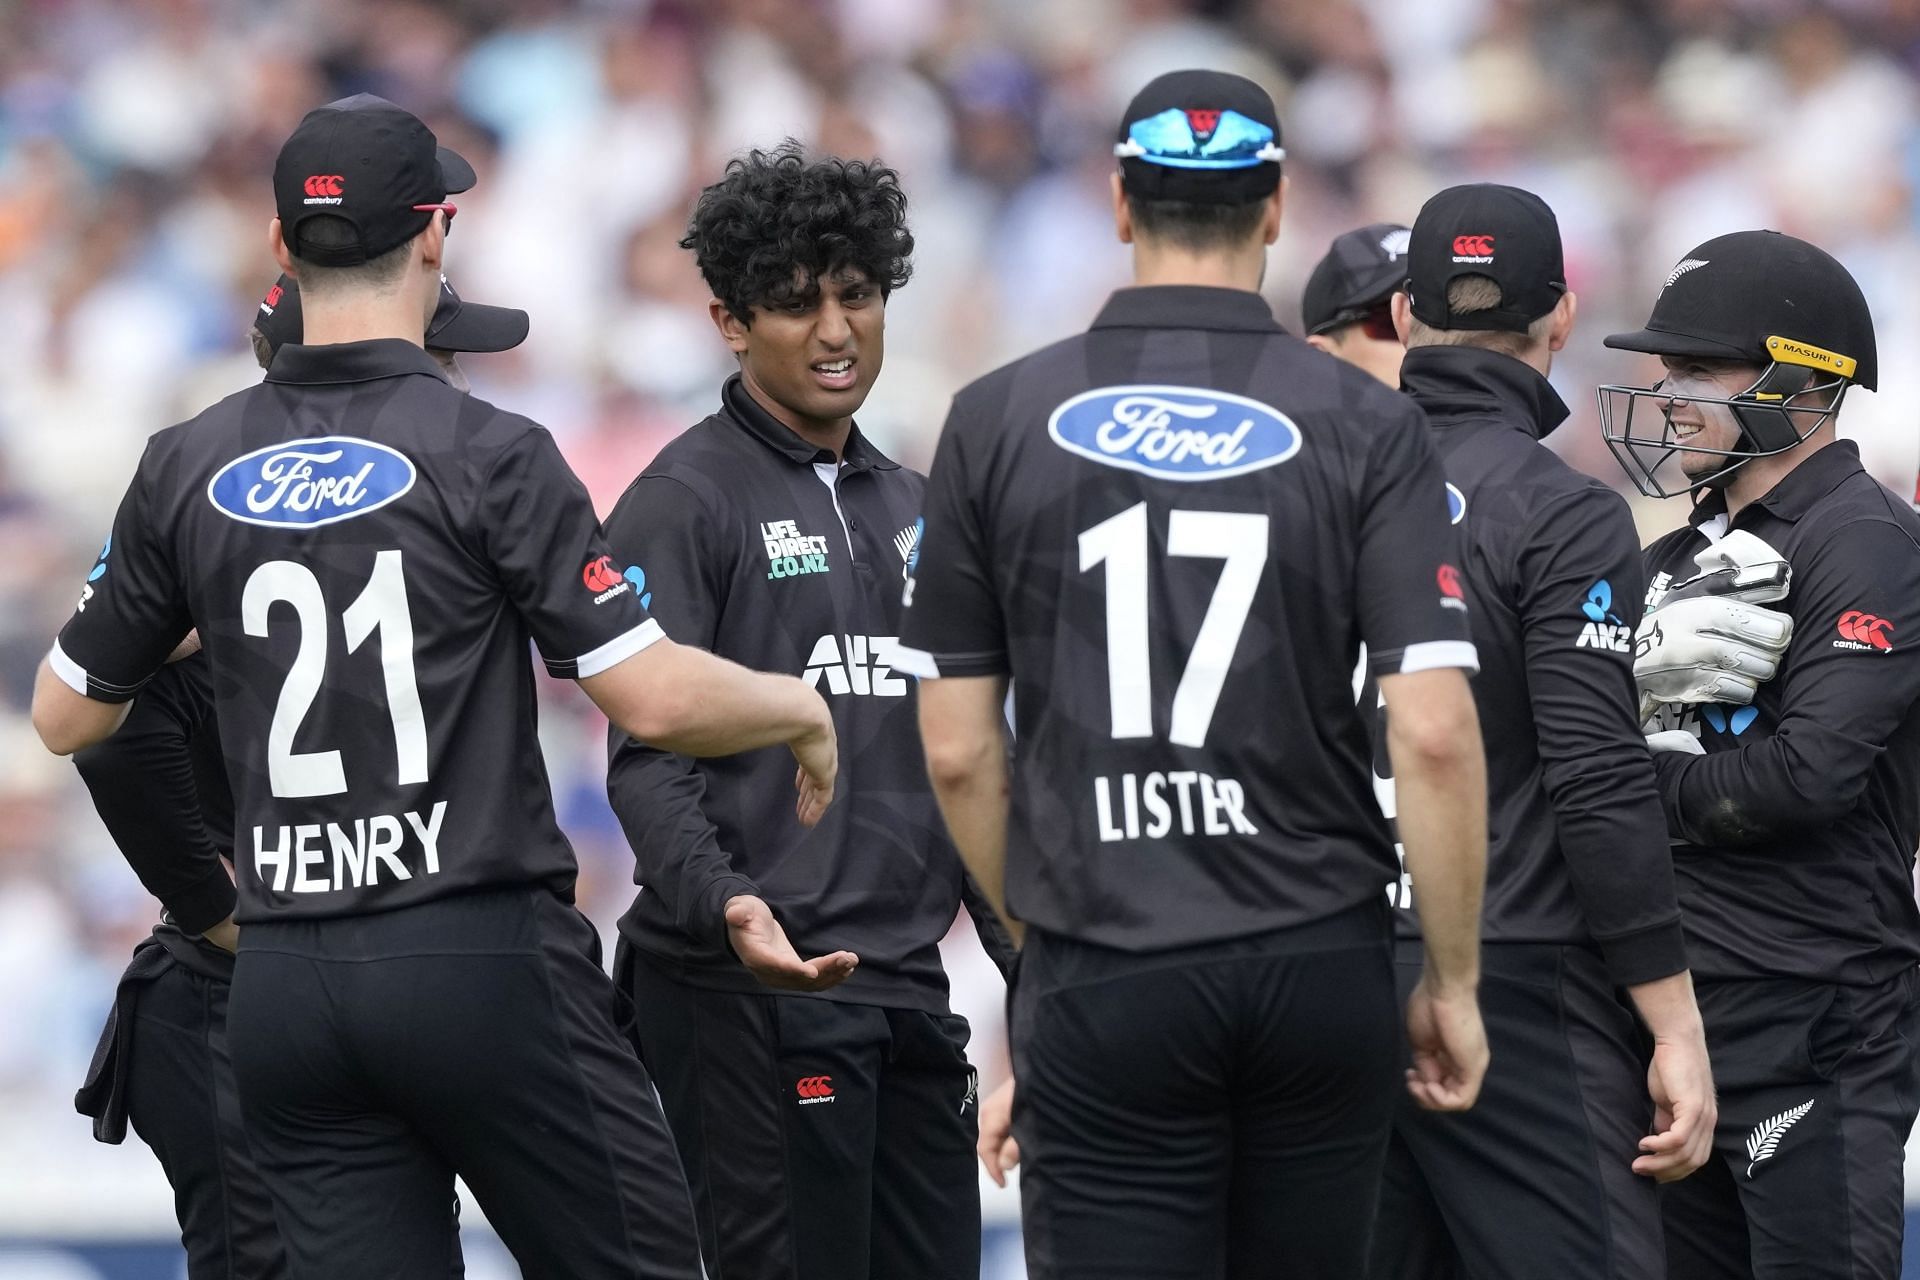 New Zealand are among the worst-hit side with injuries. (Pic: AP)